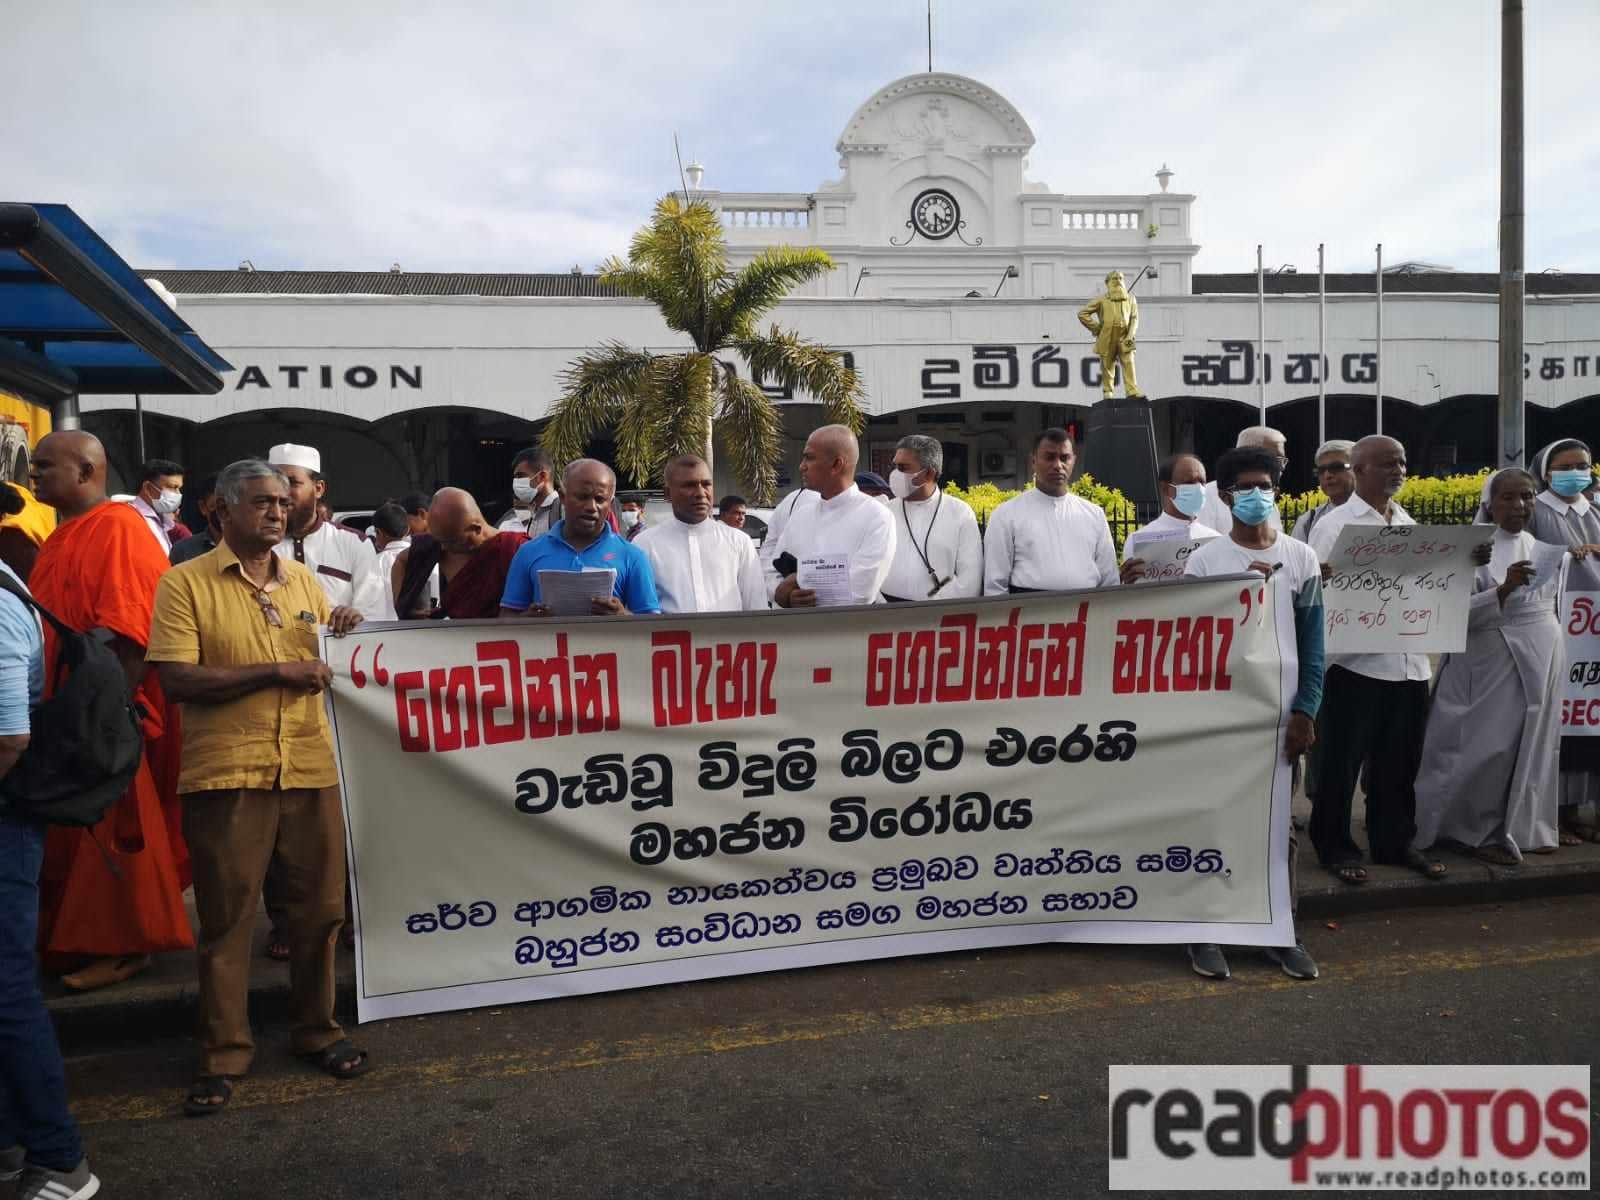 protesting against the huge increase in electricity bills - Read Photos